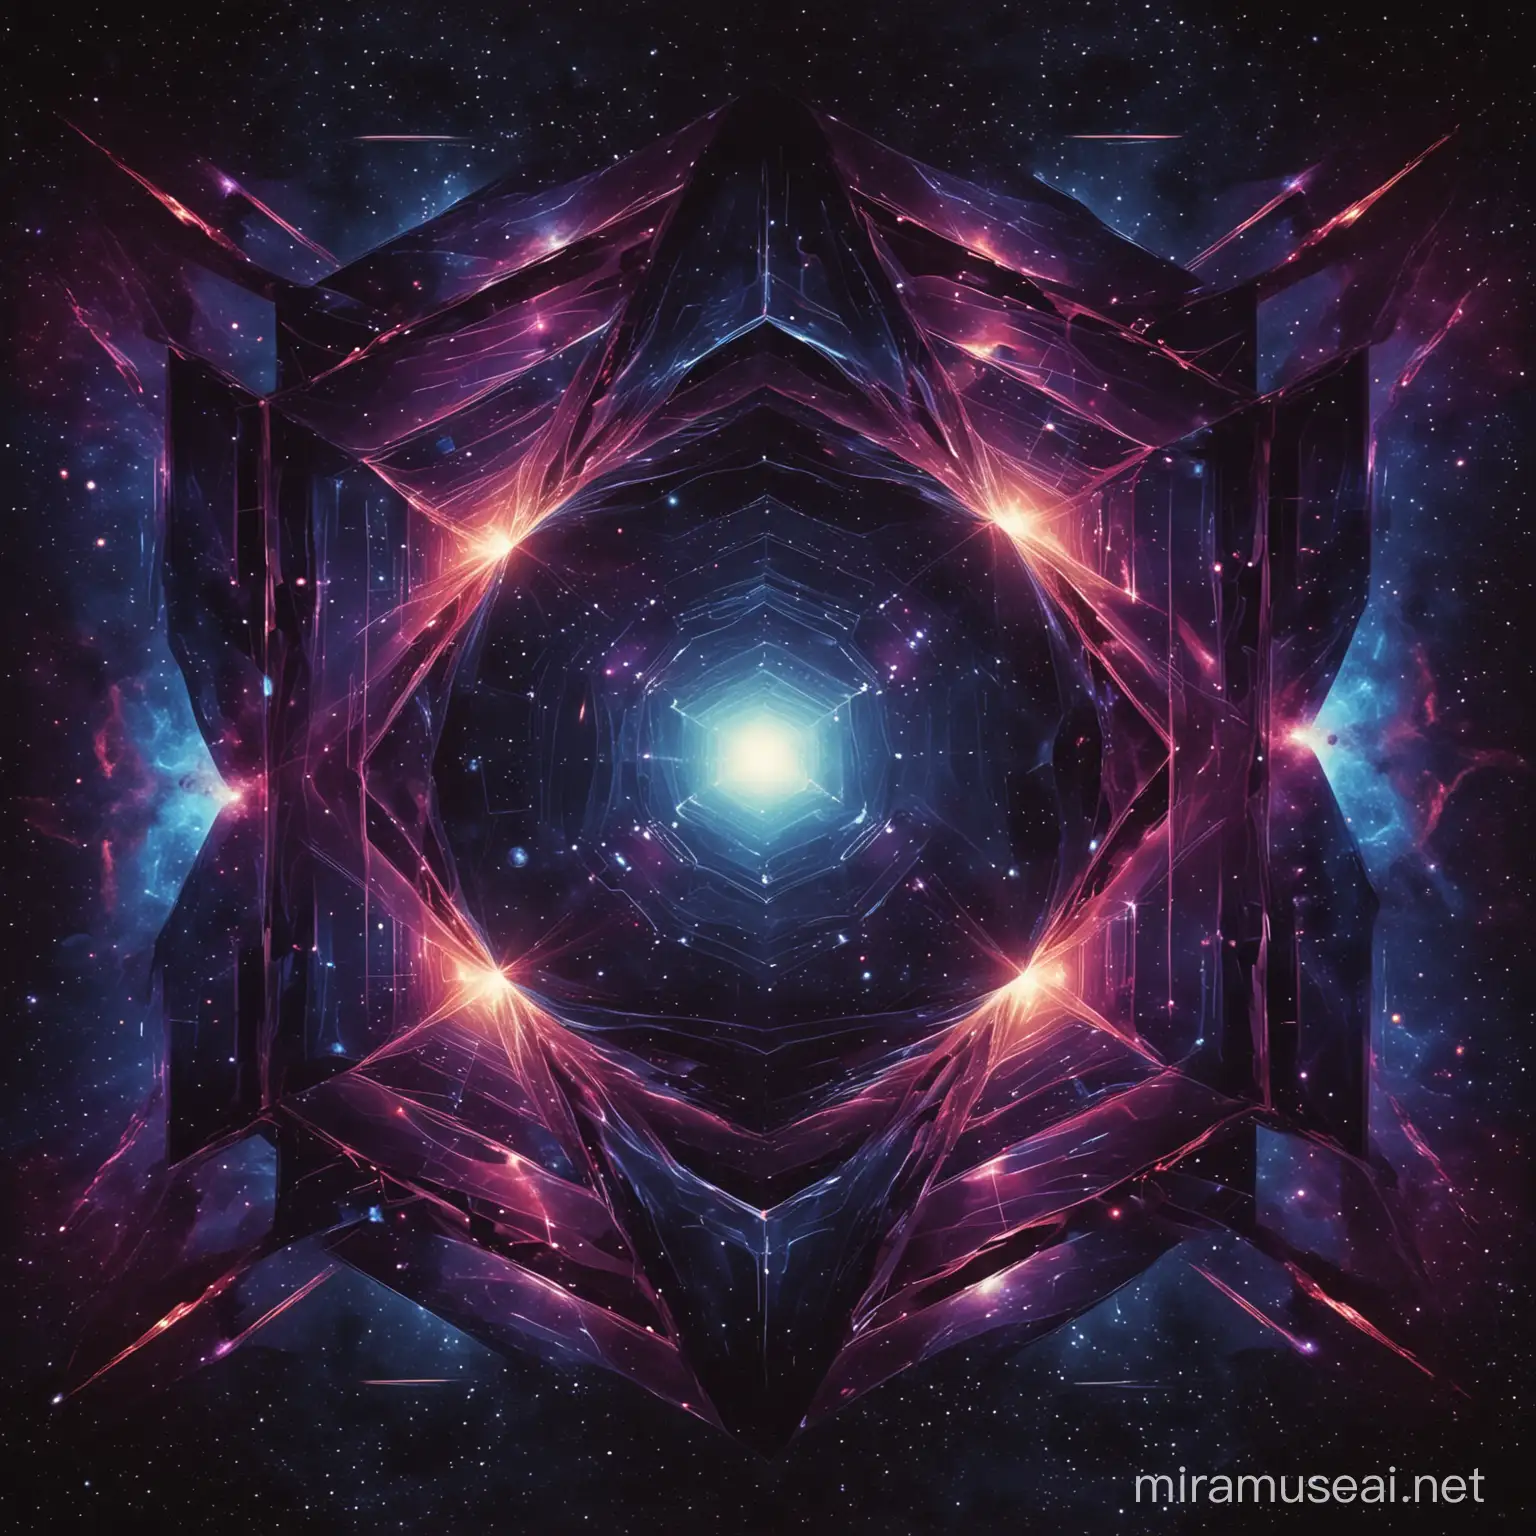 background space with geometric shapes reflecting the image like a mirror in an intergalactic war aliens come to earth psychedelic mood with dark energy in dark colors